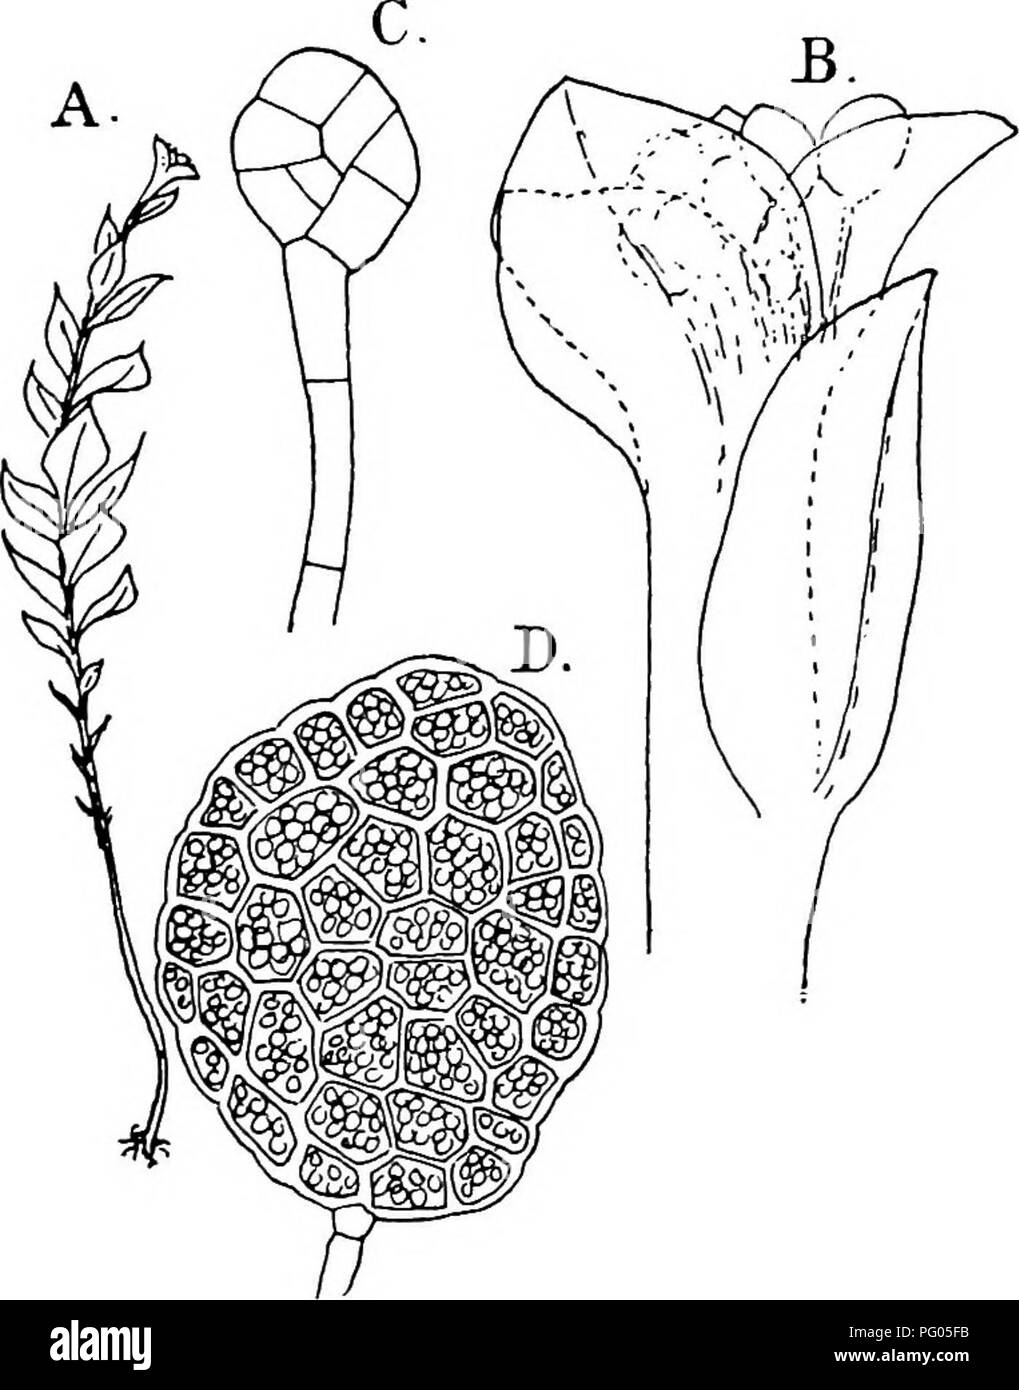 . The structure and development of mosses and ferns (Archegoniatae). Plant morphology; Mosses; Ferns. VI. THE BRYALES iig of structure. Tetraphis pelhicida is a small Moss, which at the apex of its vegetative branches bears peculiar receptacles containing multicellular gemmas of a very characteristic form. The leaves that form the receptacle are smaller than the stem leaves, and closely set so as to form a sort of cup in which the gemmae are produced in large numbers. These arise as slender multicellular hairs, the end cell of which enlarges and forms a disc, at first one-layered, but later, b Stock Photo